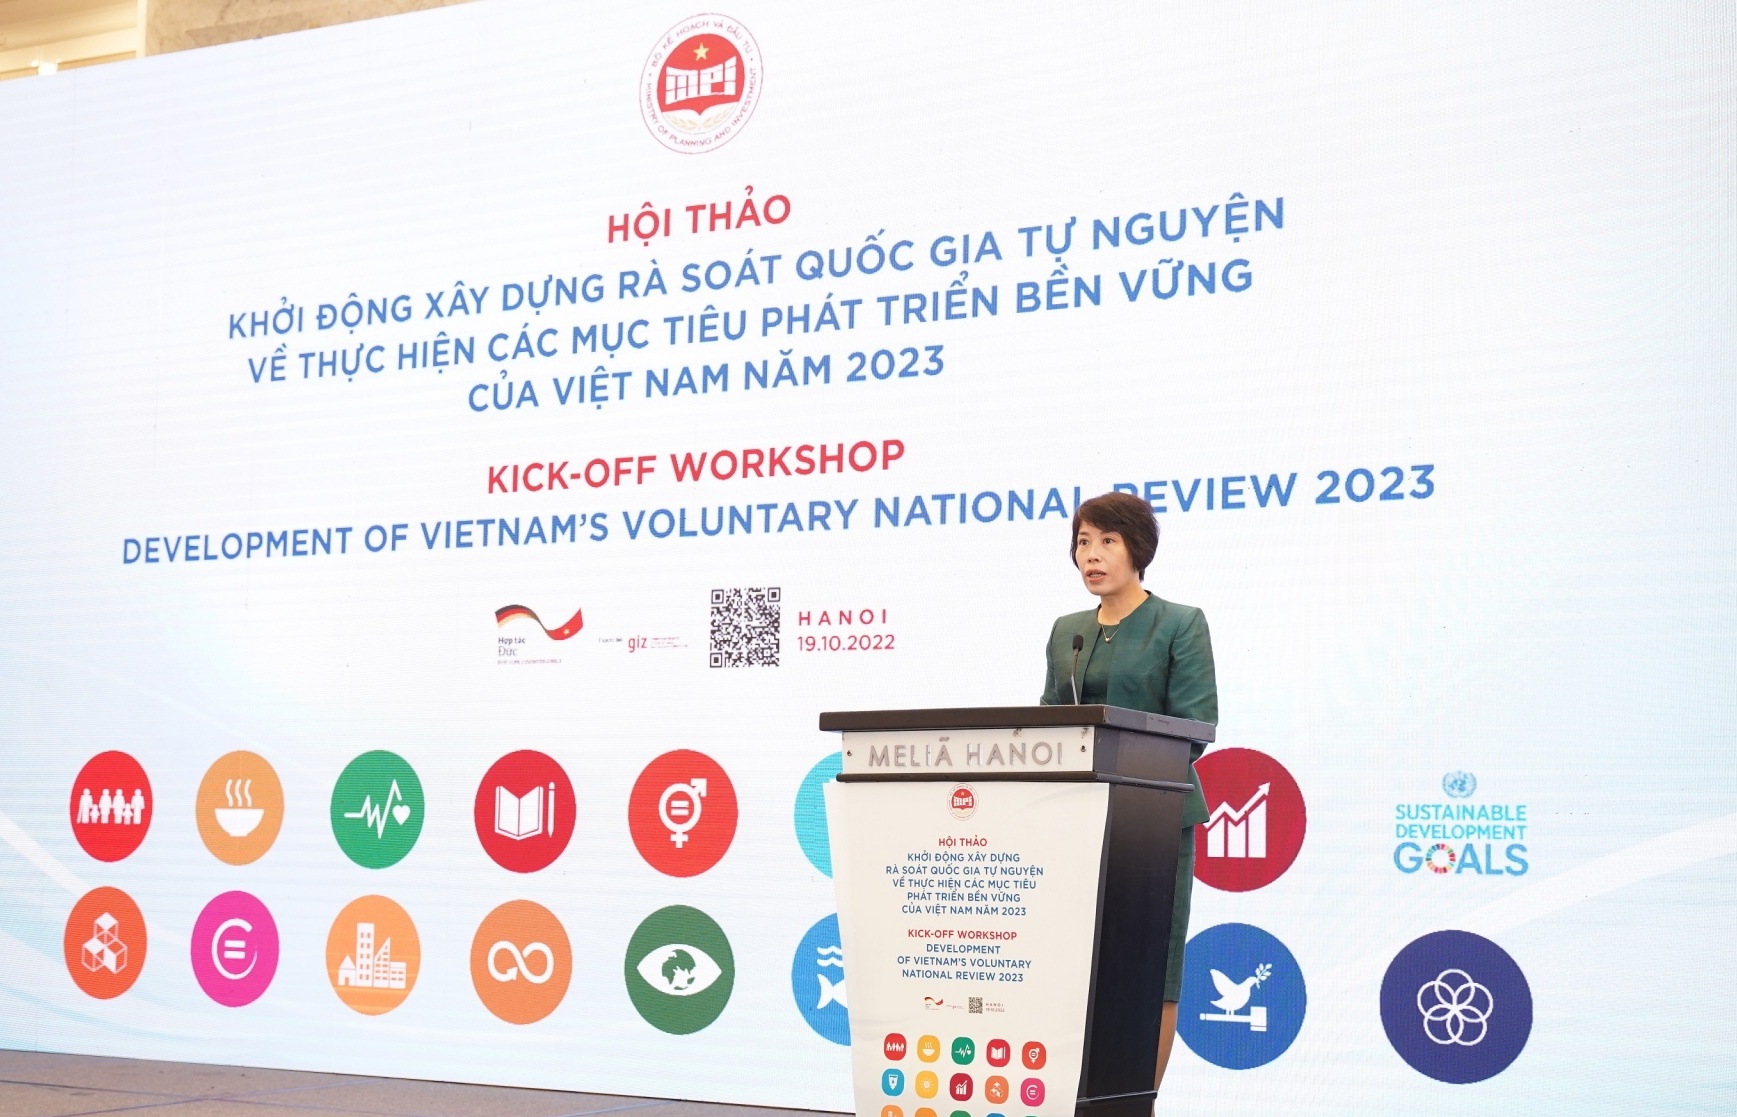 Kick-off workshop on the development of Vietnam’s voluntary national review 2023